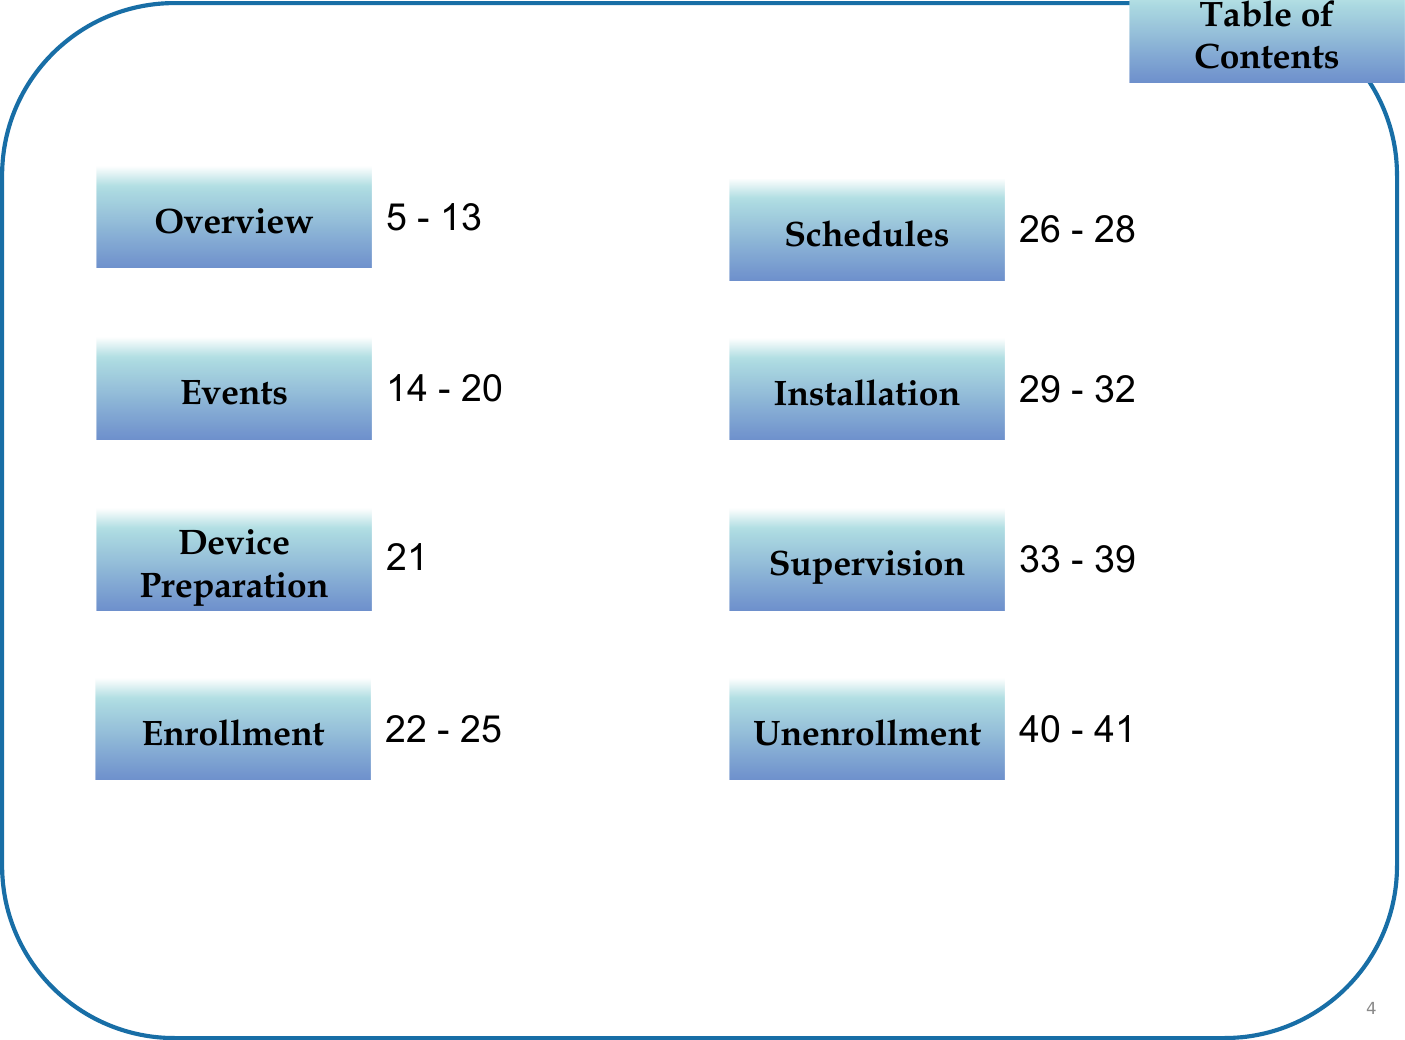 Table of ContentsTable of Contents4EventsEvents 14 - 20Device PreparationDevice Preparation 21EnrollmentEnrollment 22 - 25SchedulesSchedules 26 - 28OverviewOverview 5 - 13InstallationInstallation 29 - 32SupervisionSupervision 33 - 39UnenrollmentUnenrollment 40 - 41